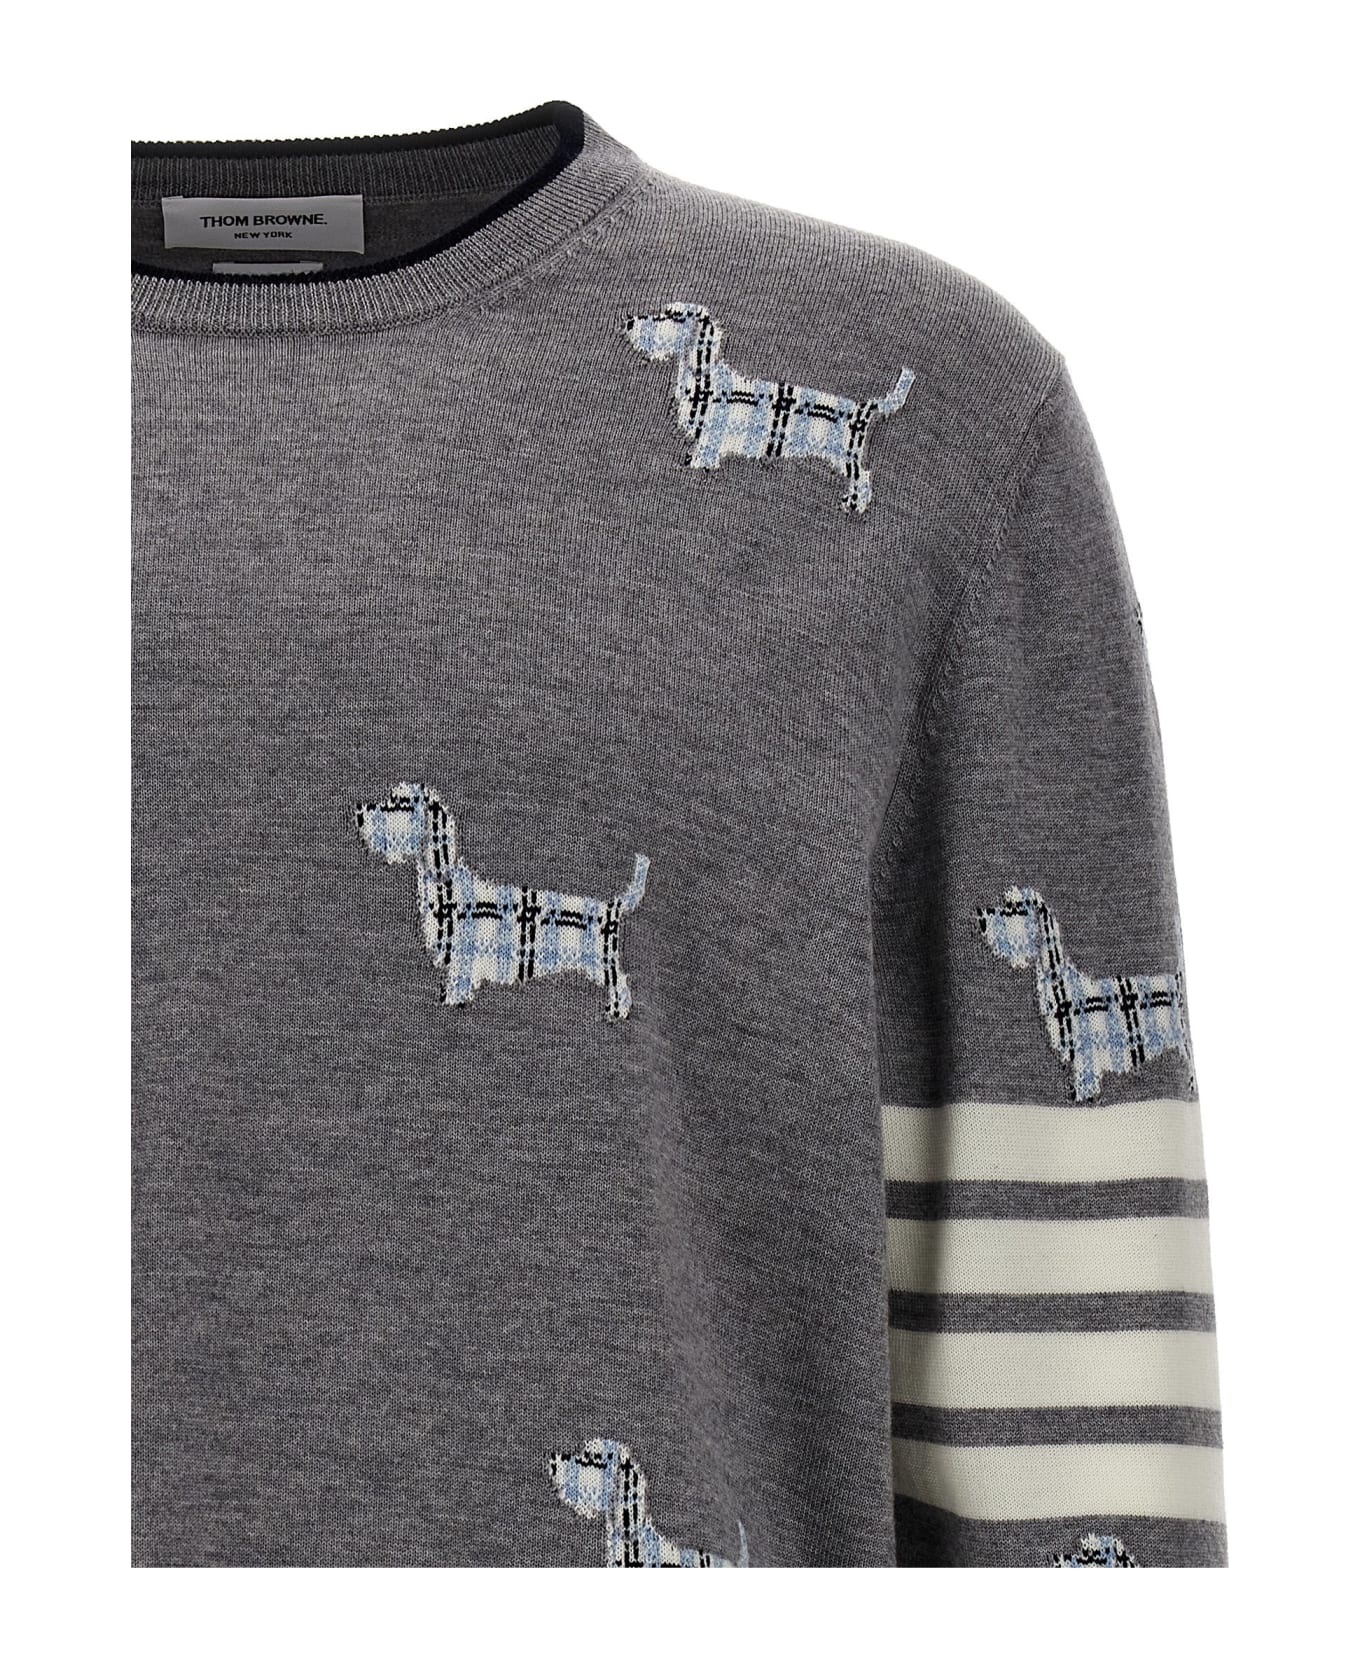 Thom Browne 'hector' Sweater - Gray ニットウェア